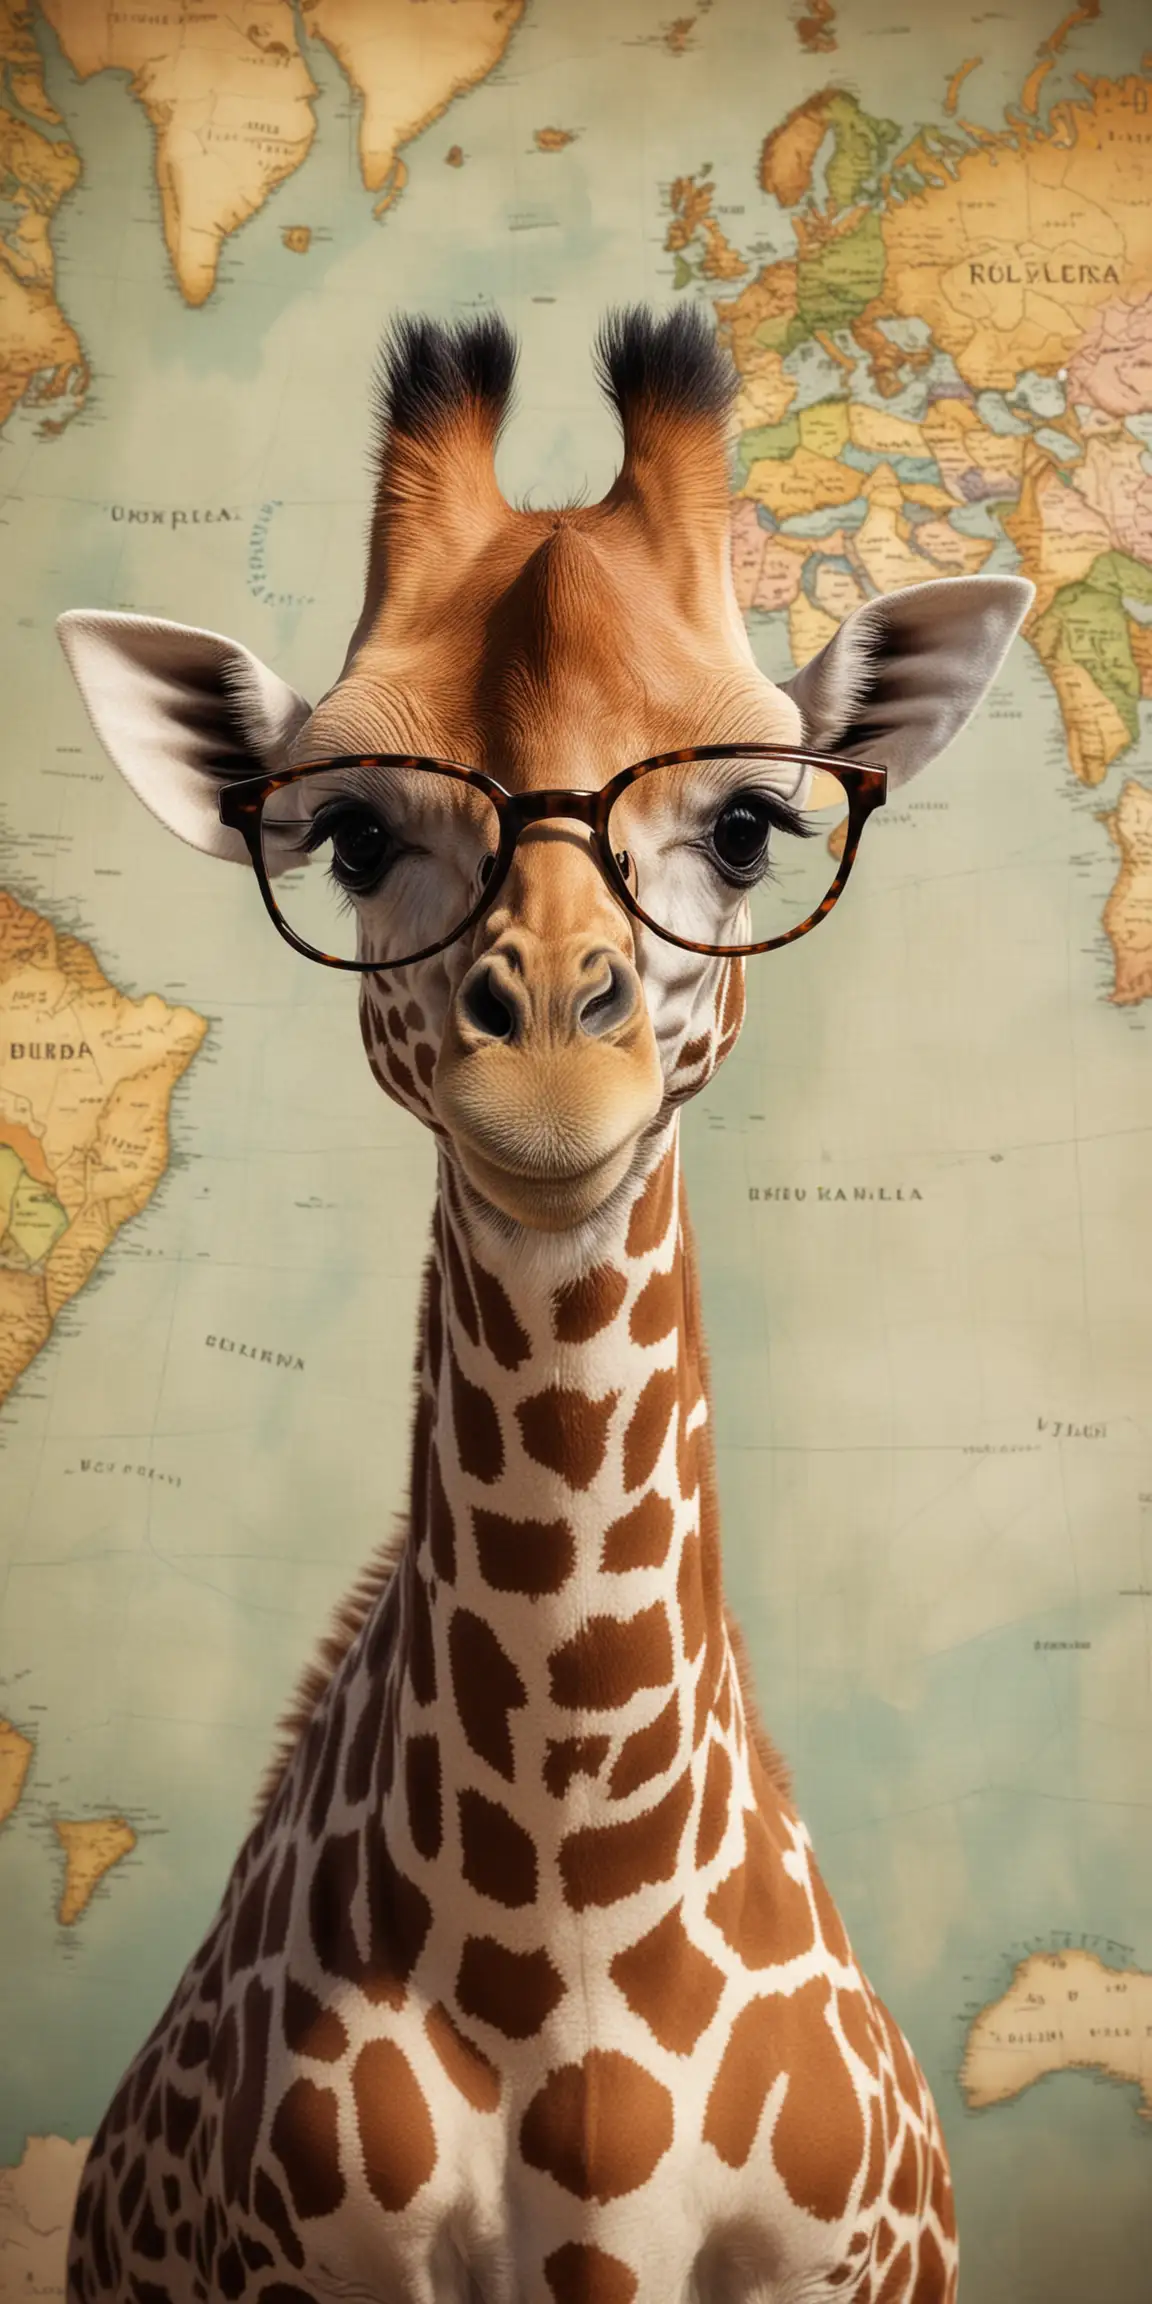 Adorable Baby Giraffe Wearing Glasses Explores a World Map